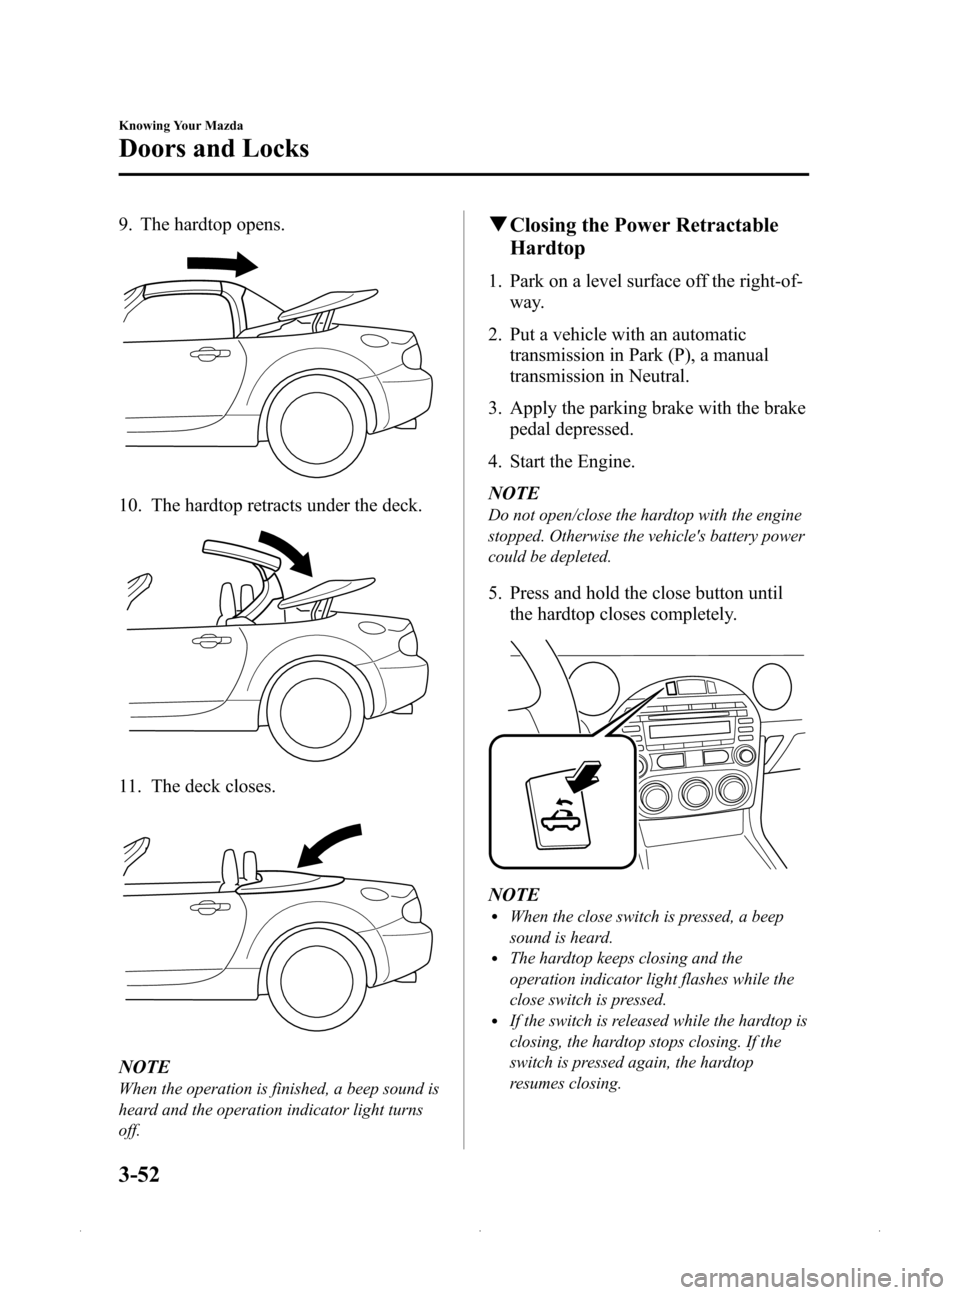 MAZDA MODEL MX-5 2015  Owners Manual (in English) Black plate (106,1)
9. The hardtop opens.
10. The hardtop retracts under the deck.
11. The deck closes.
NOTE
When the operation is finished, a beep sound is
heard and the operation indicator light tur